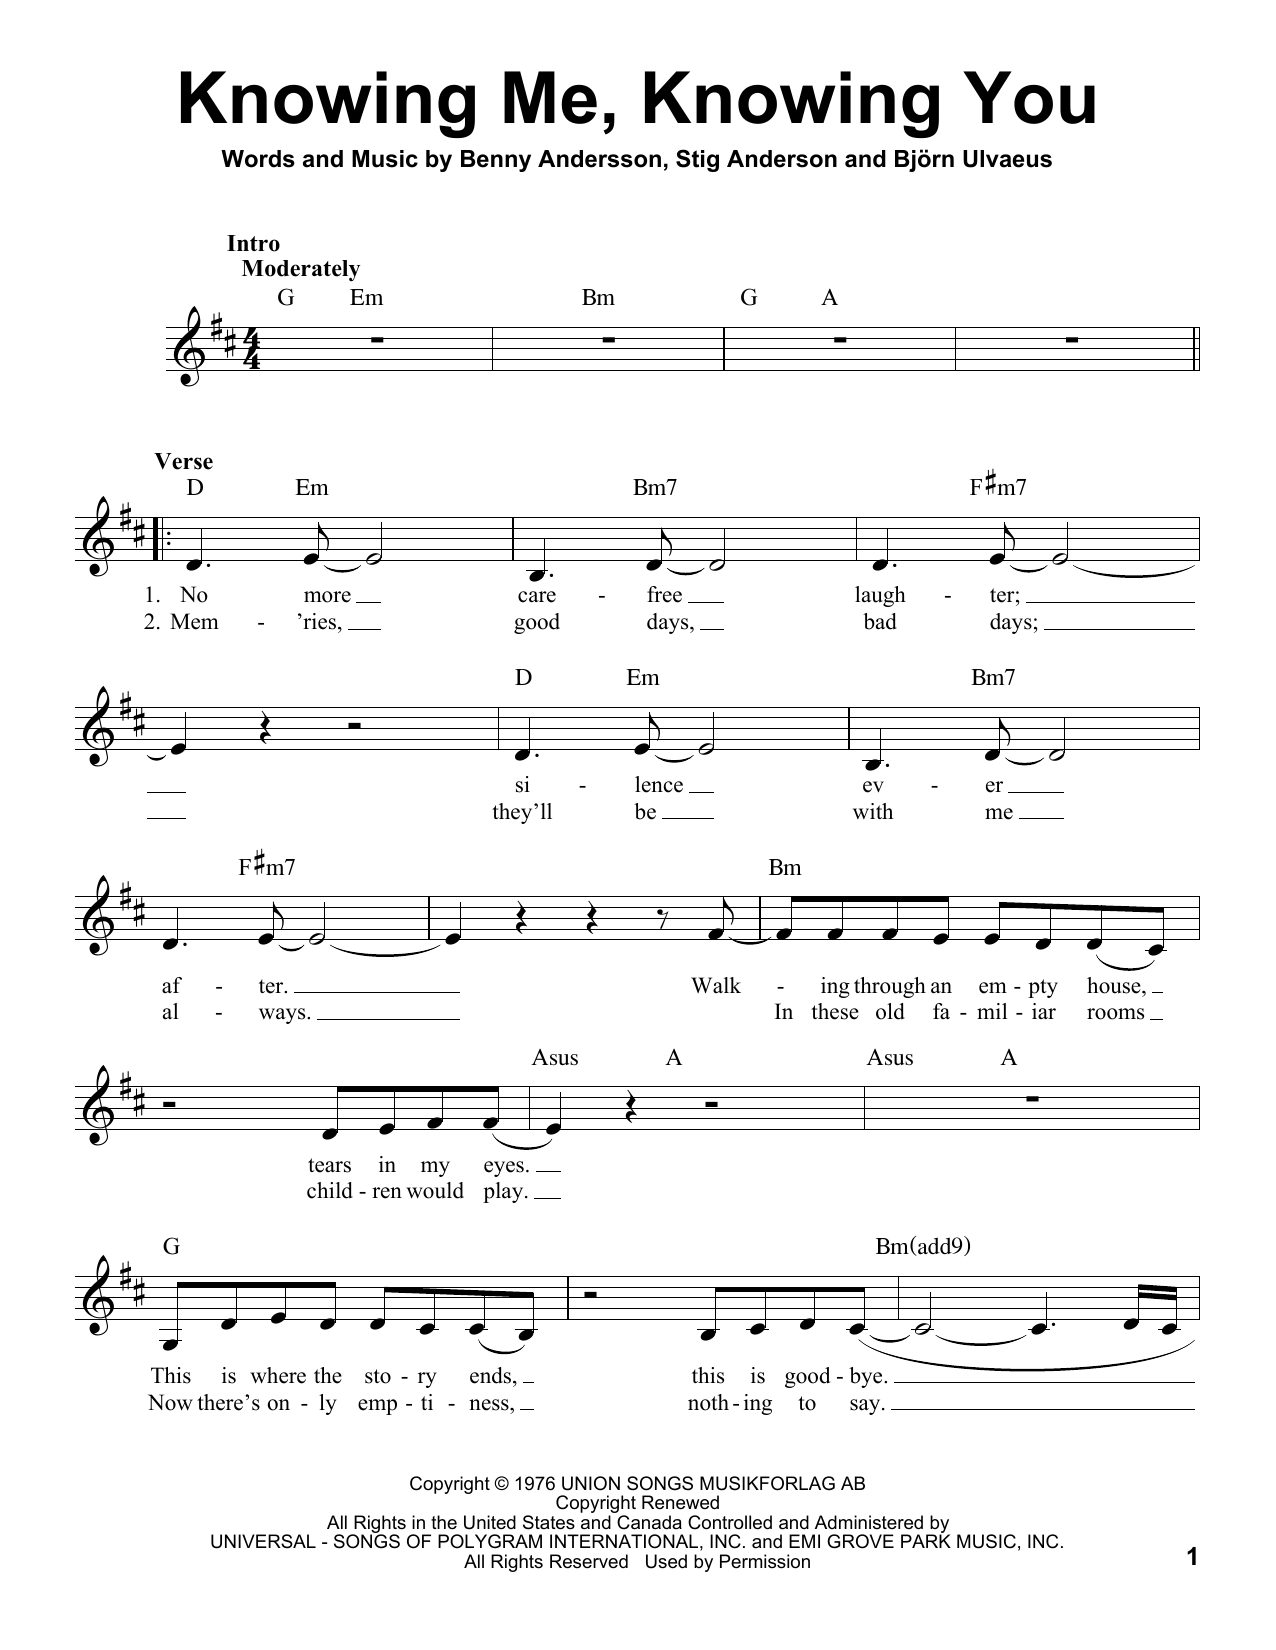 Download Abba Knowing Me, Knowing You Sheet Music